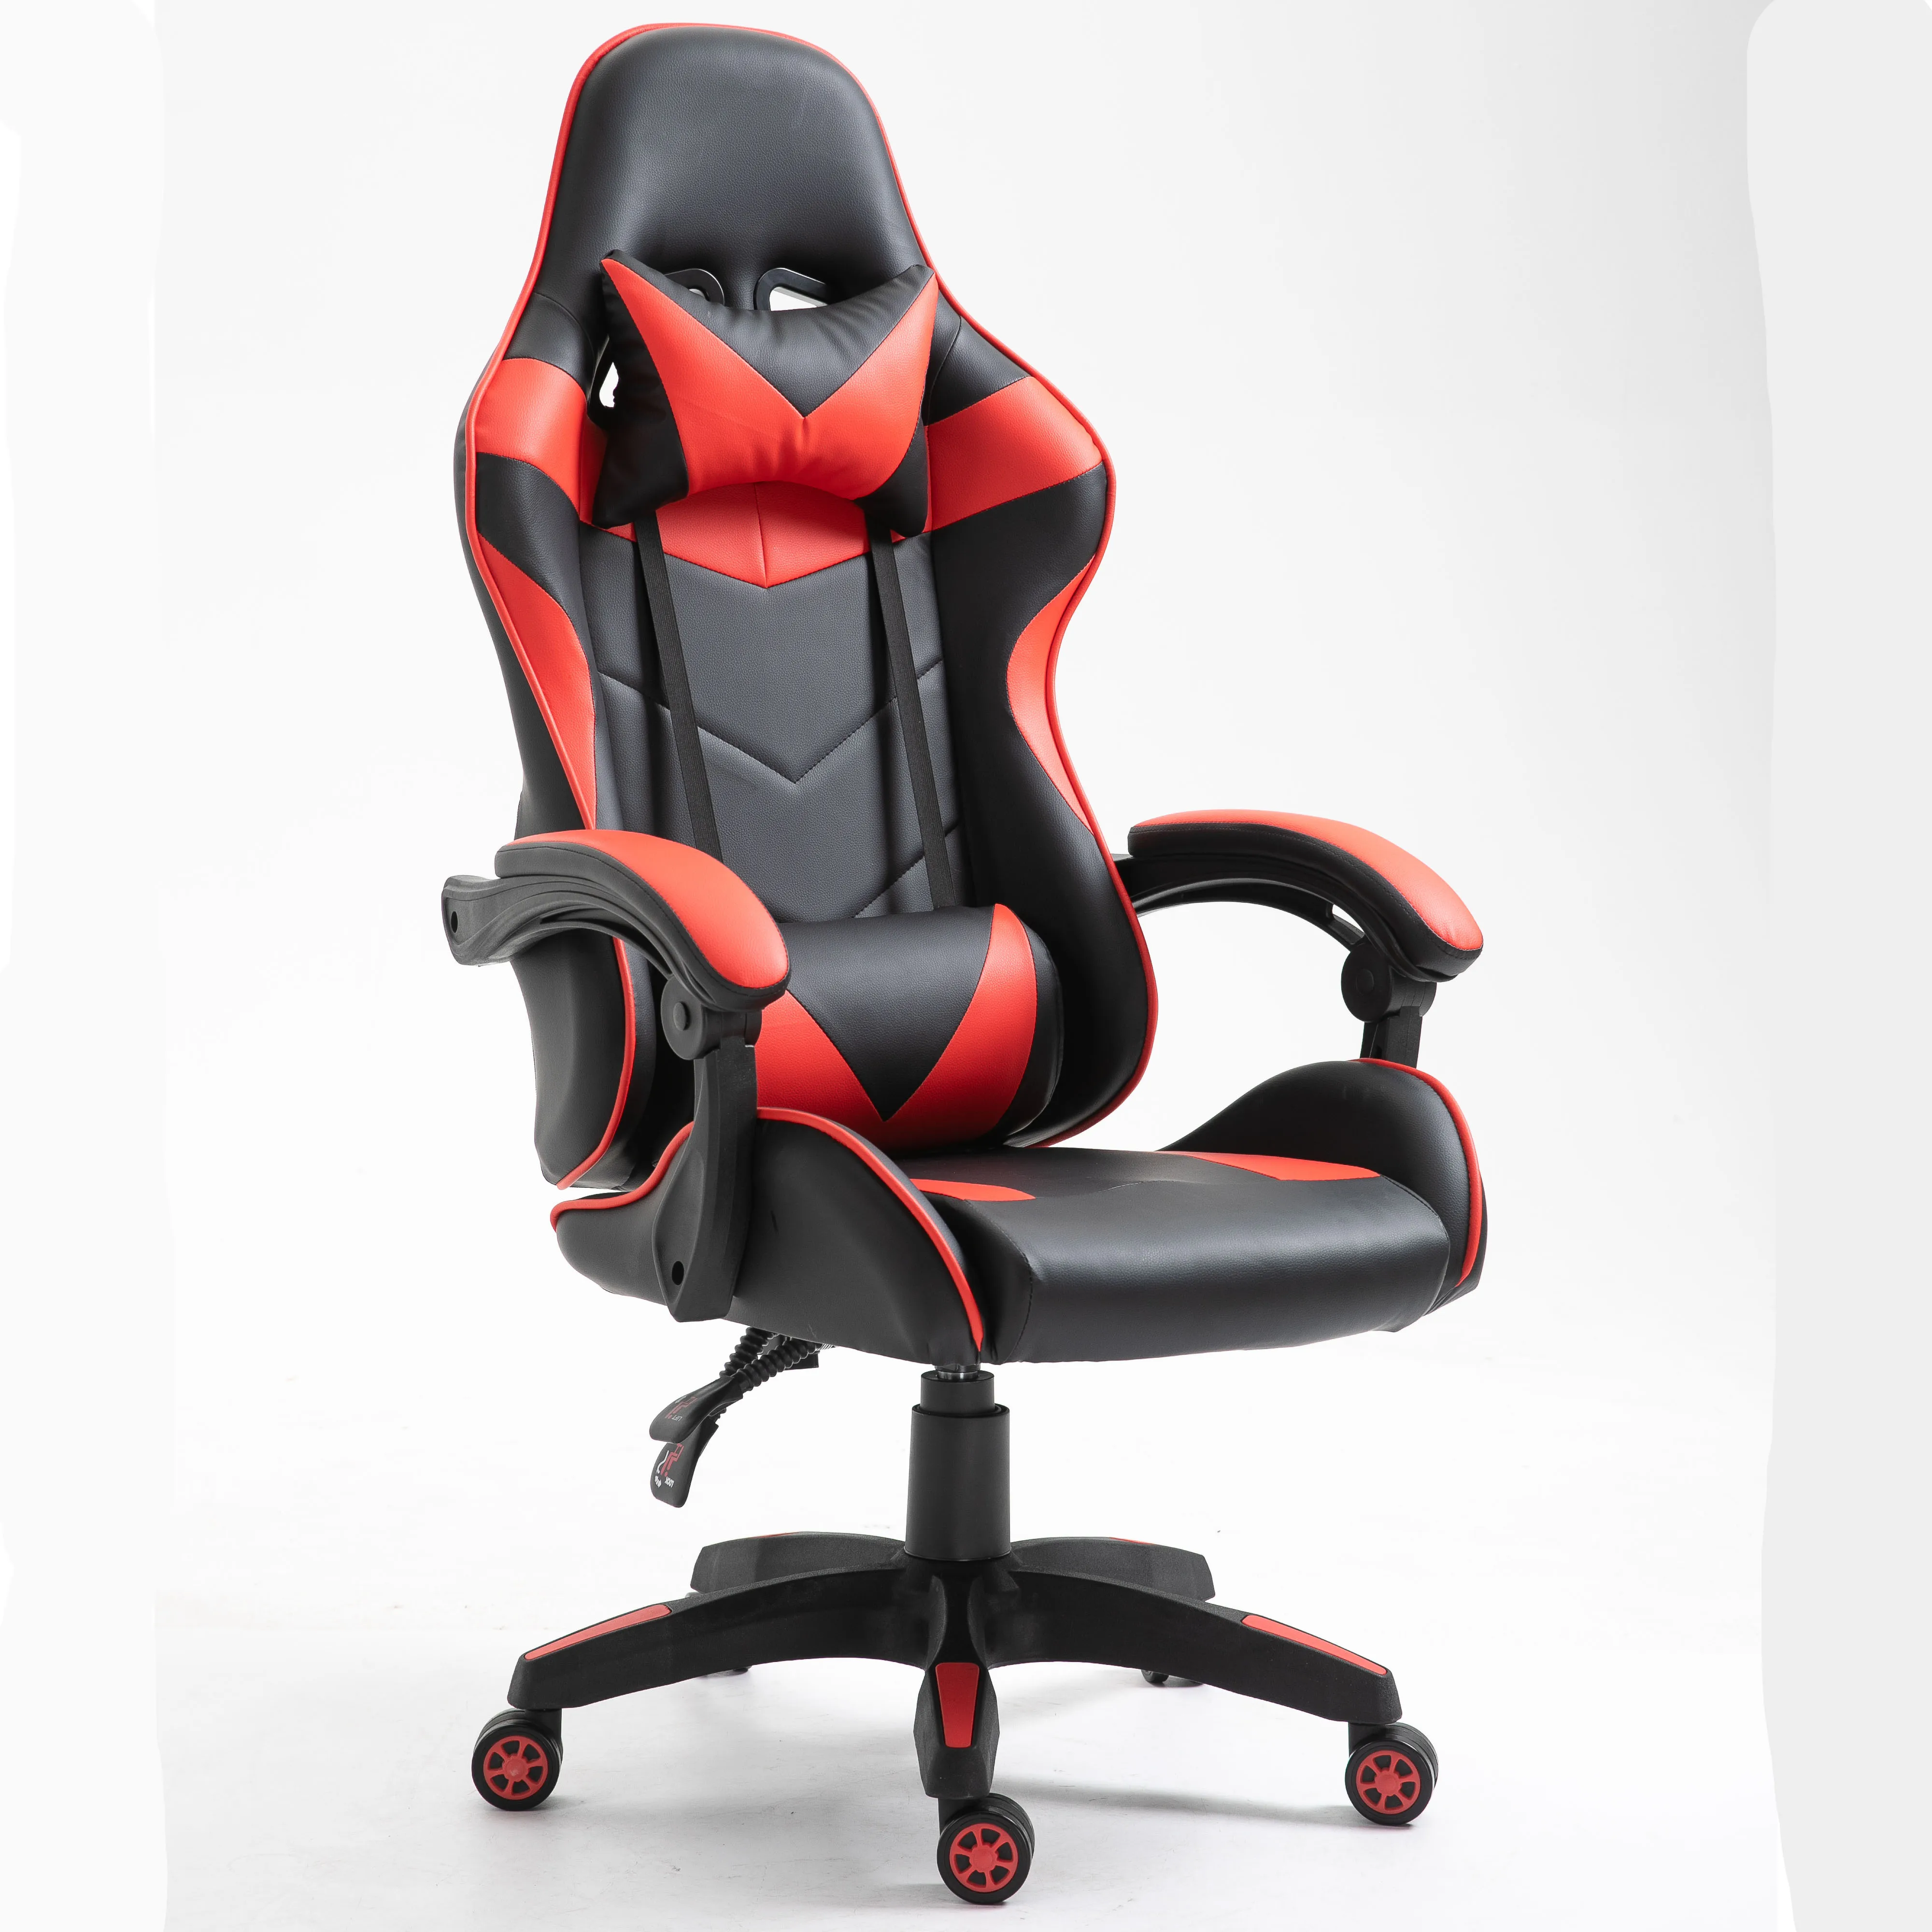 Computer Chair Gaming Red Massage Pc Computer Racing Cheap Gaming Chair Silla Gamer Buy Game Chair Chair Gaming Computer Executive Leather Office Chair With Moulded Foam Gamer Chair Gaming Cheap Comfort Custom